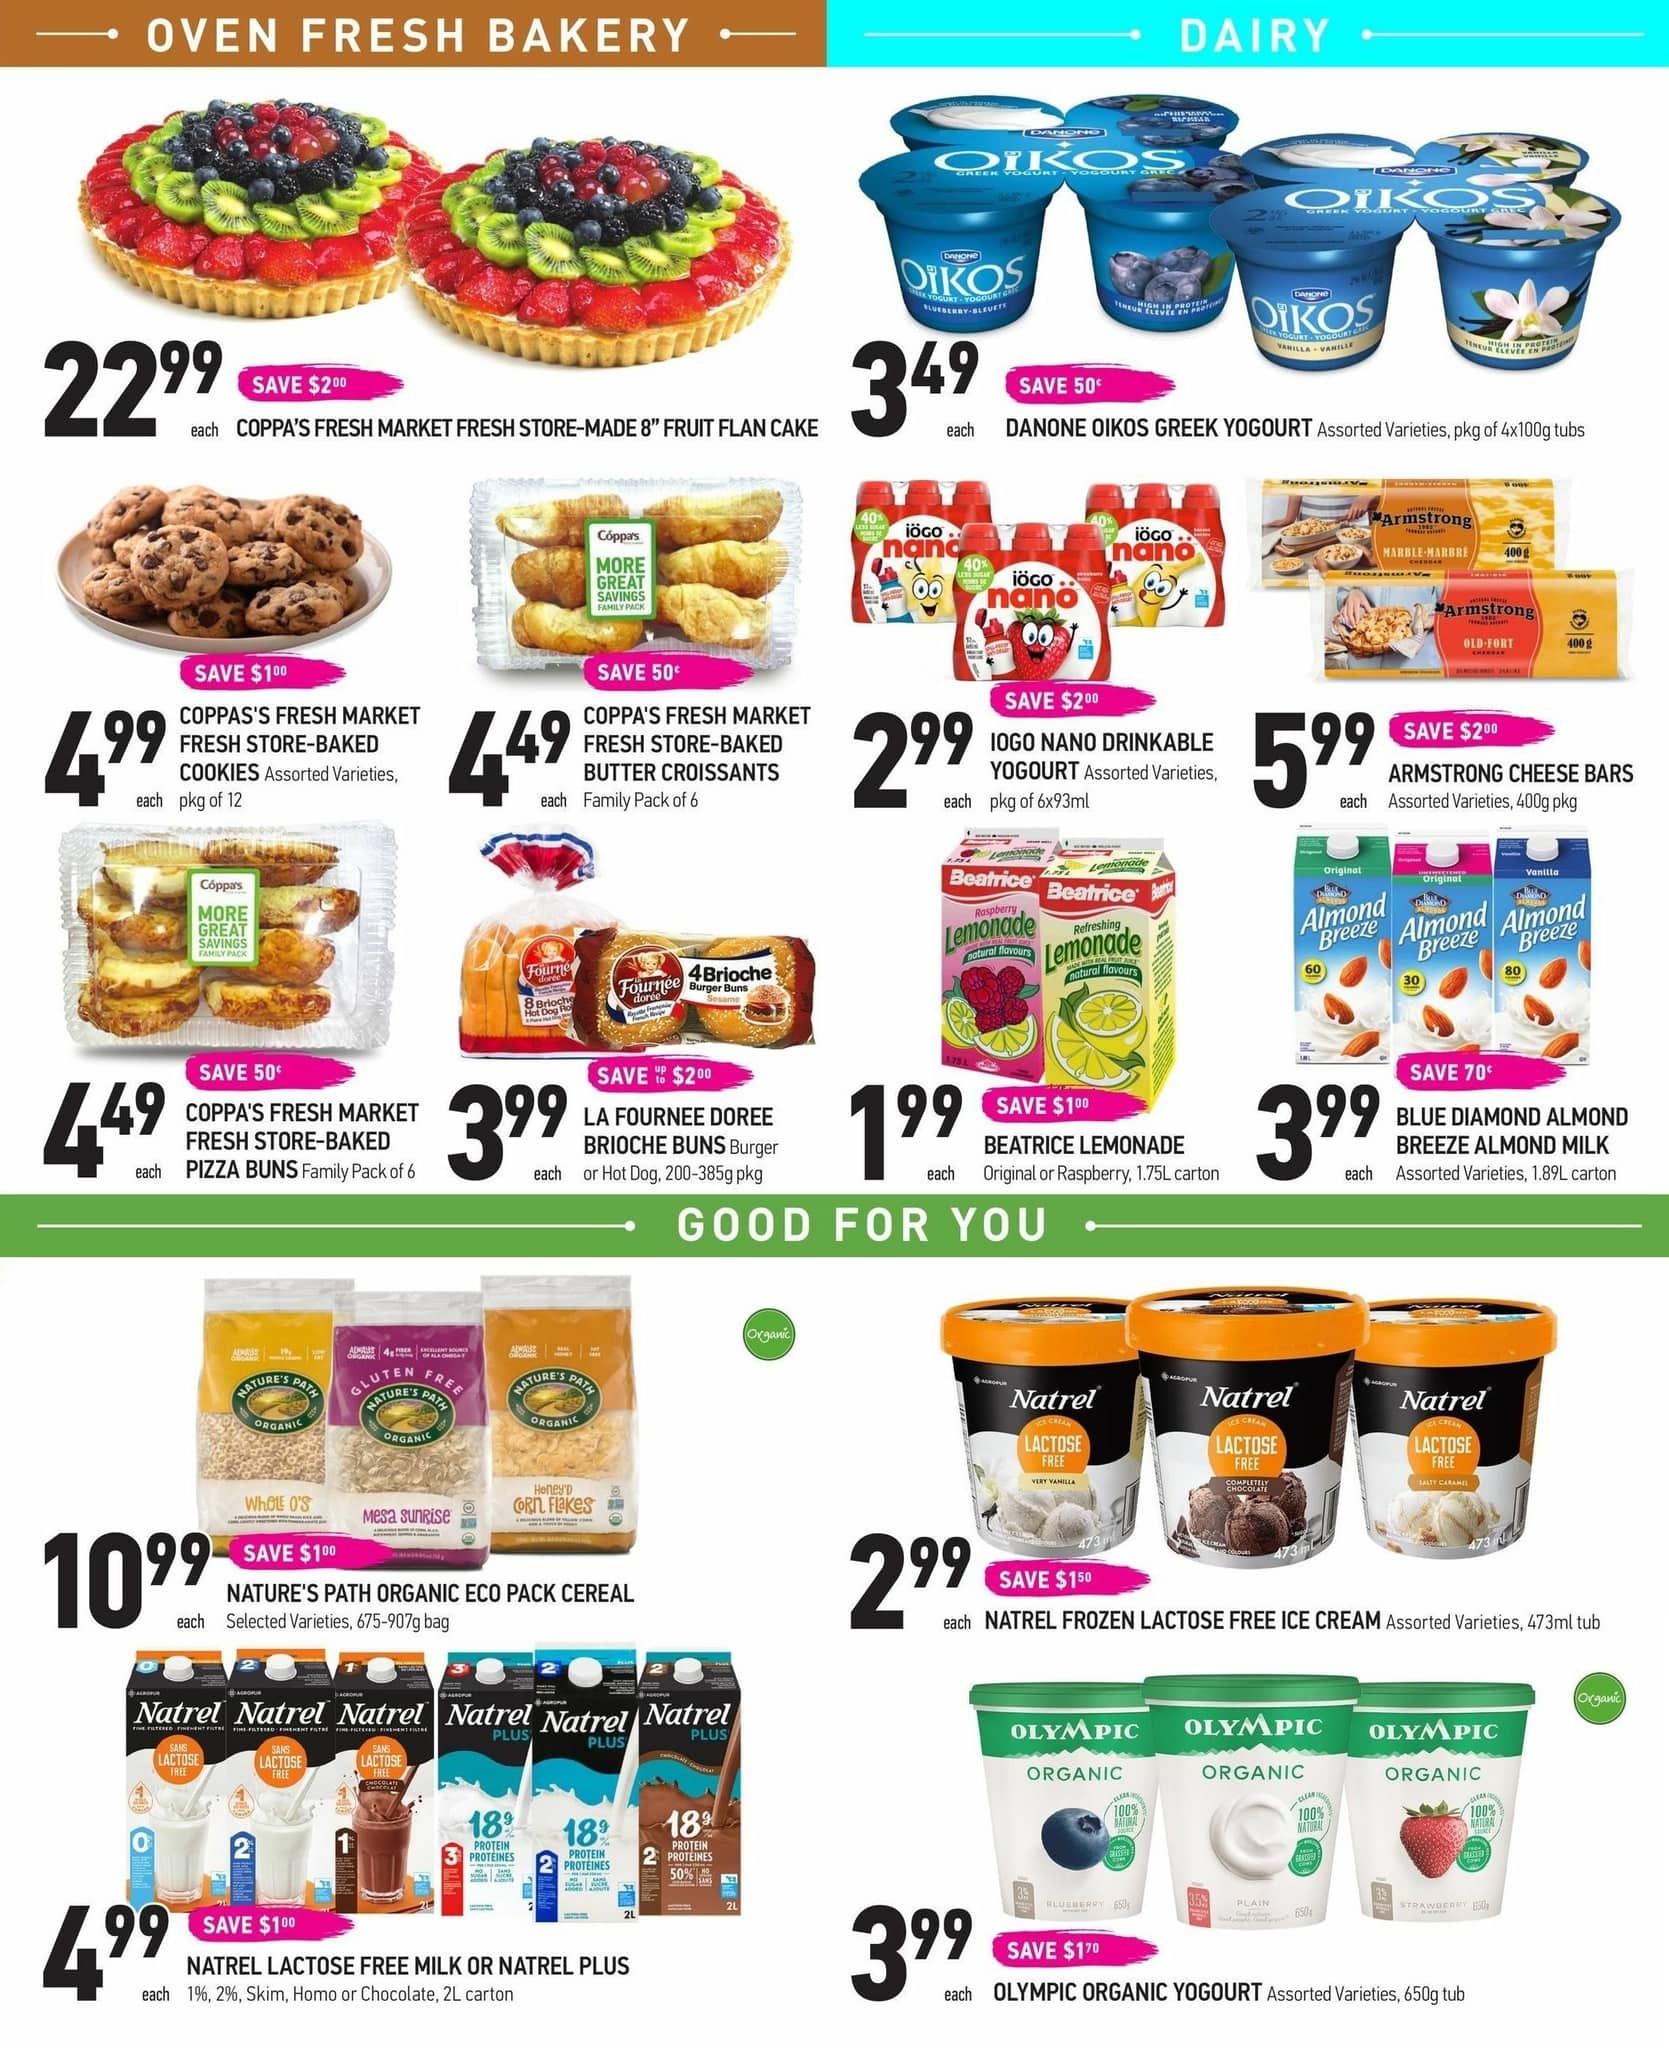 Coppa's Fresh Market - Weekly Flyer Specials - Page 5